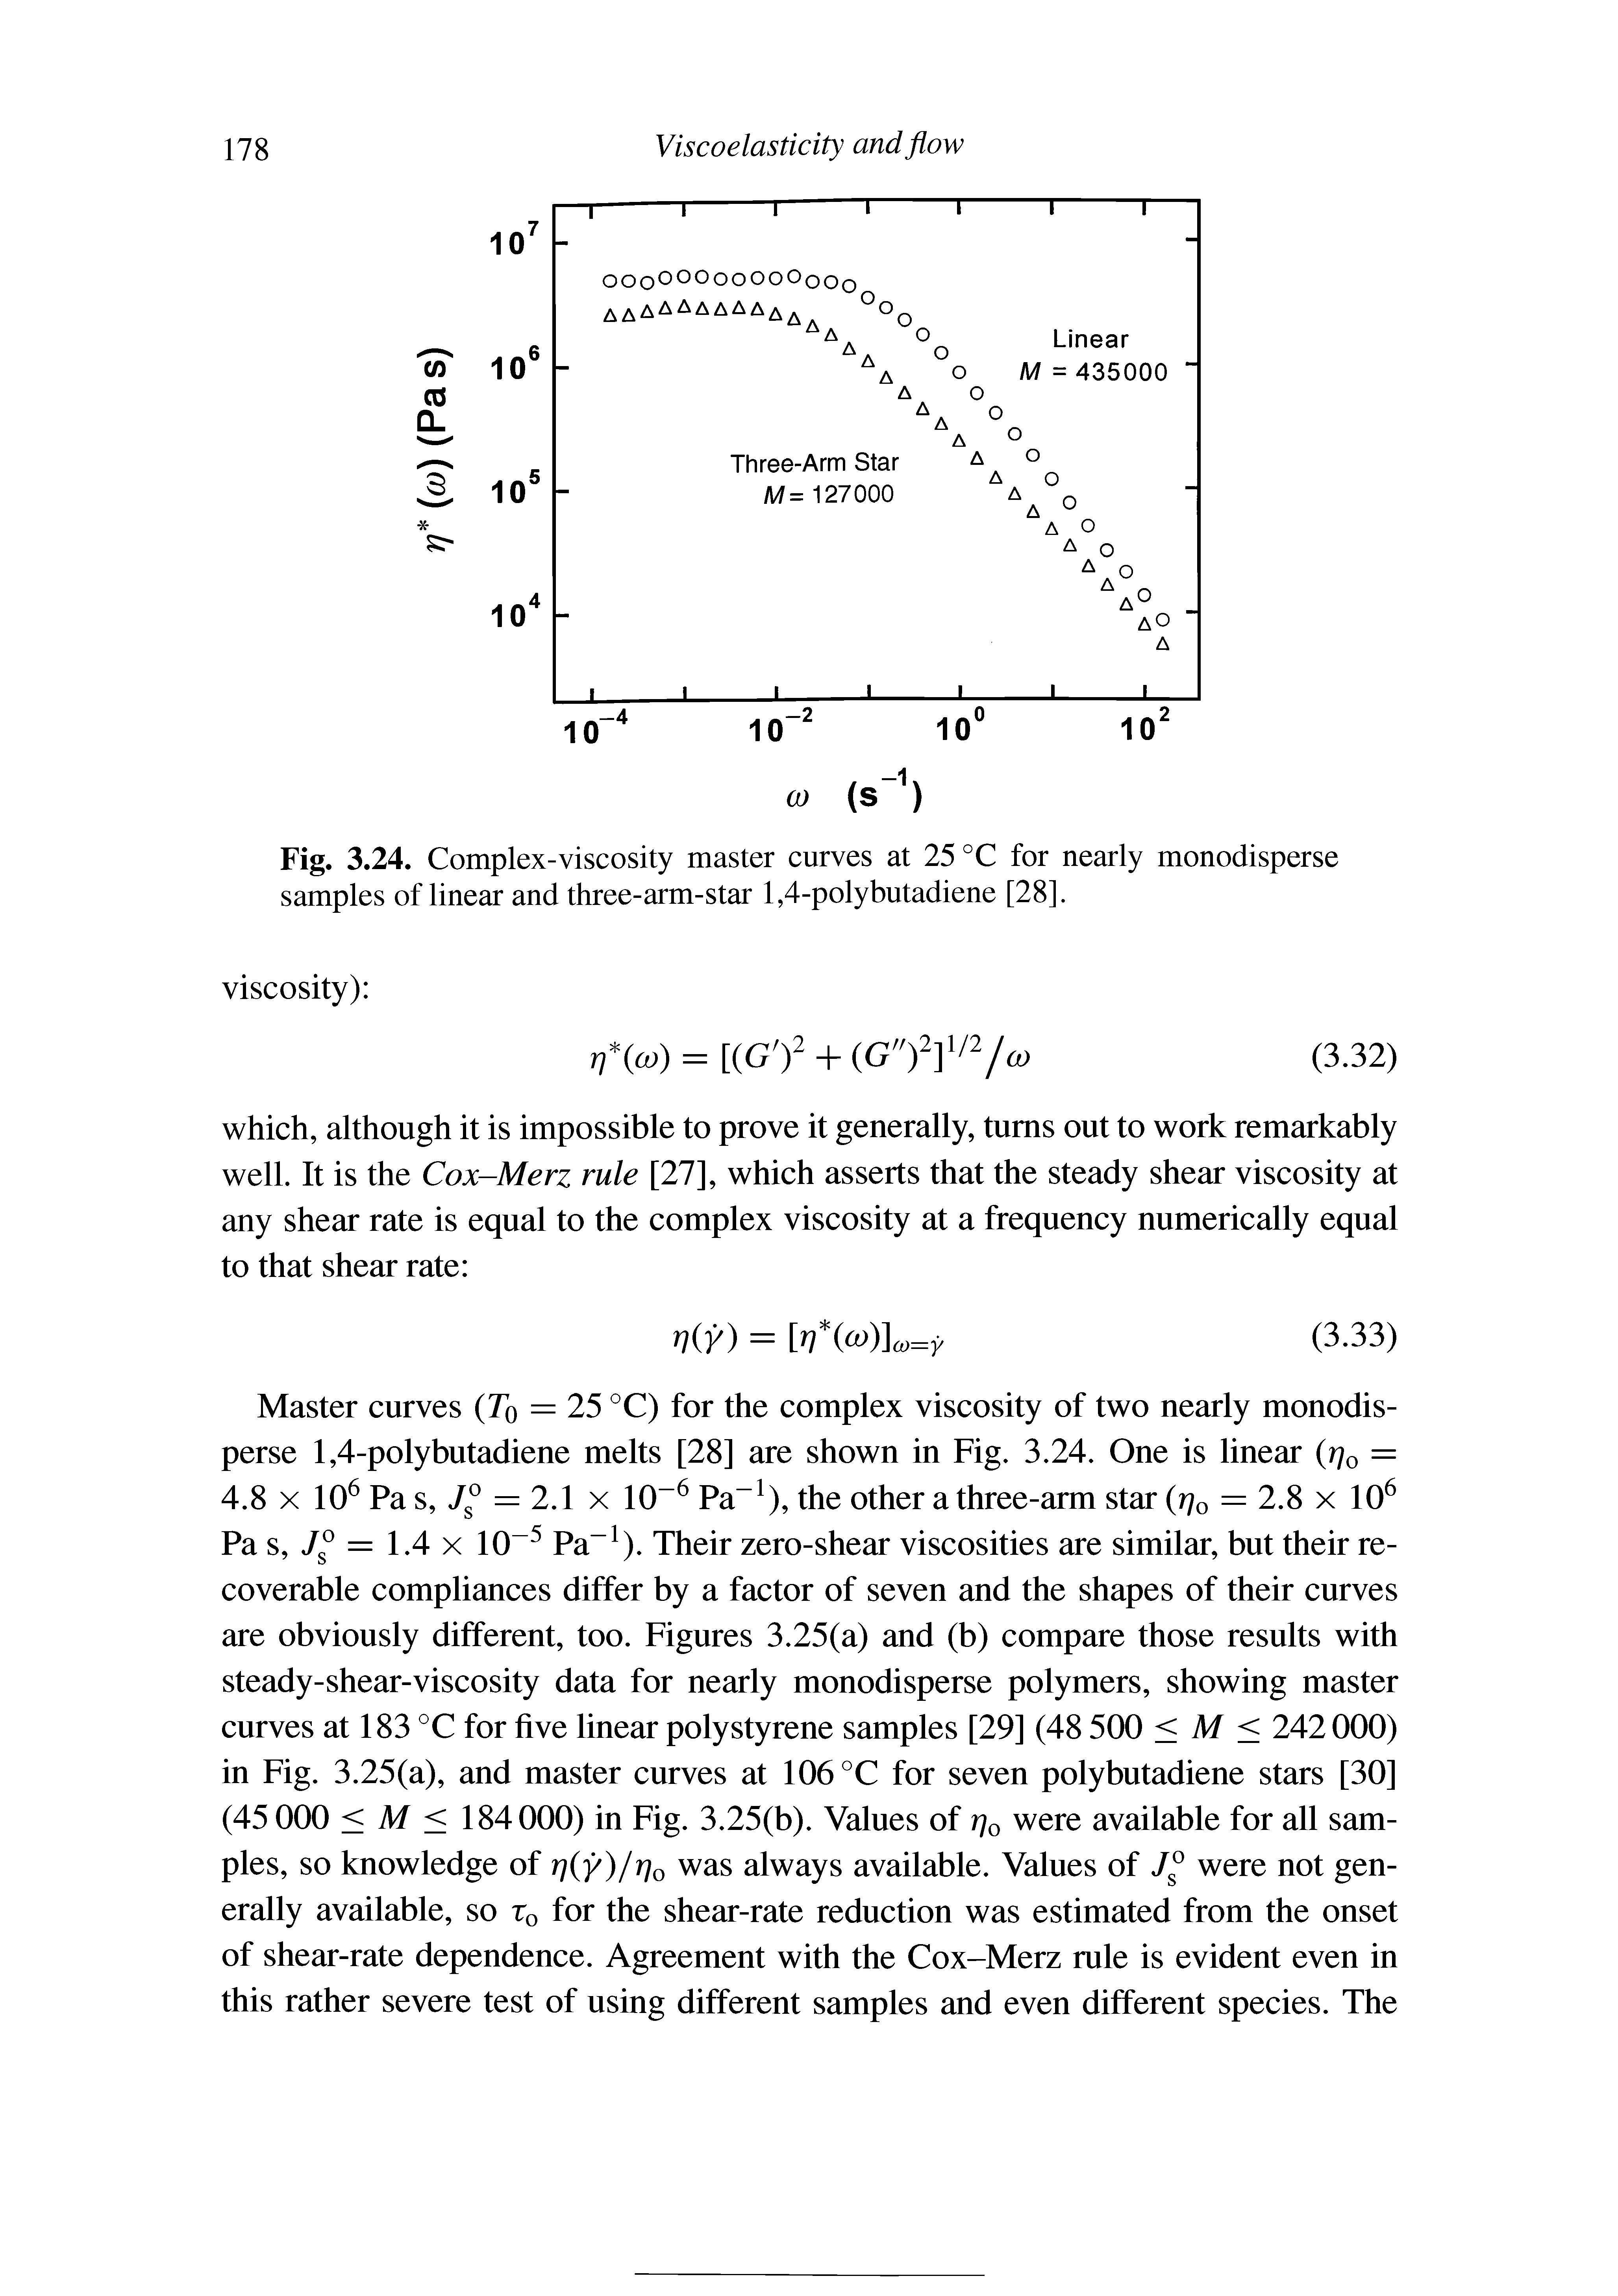 Fig. 3.24. Complex-viscosity master curves at 25 °C for nearly monodisperse samples of linear and three-arm-star 1,4-polybutadiene [28].